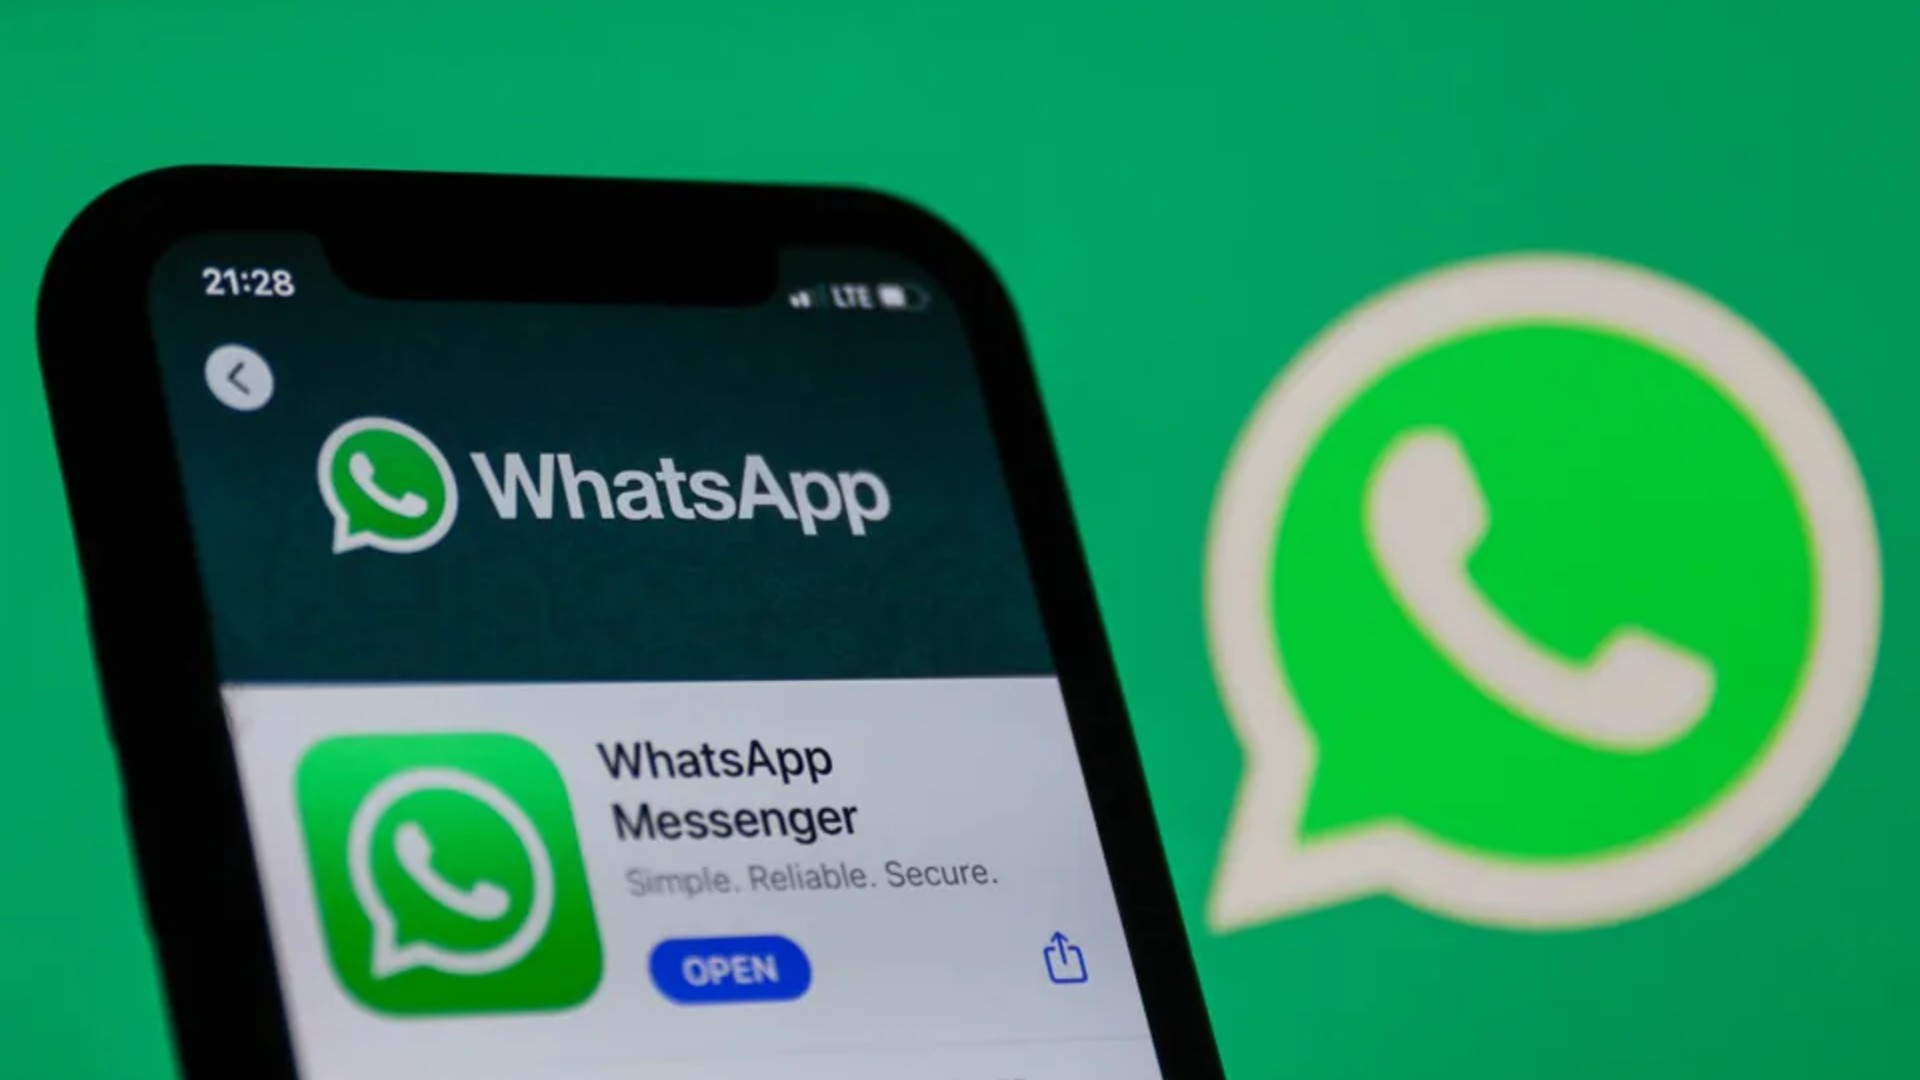 WhatsApp Will Reward Users With Rs 51 Cashback If They Use The Payments Feature.